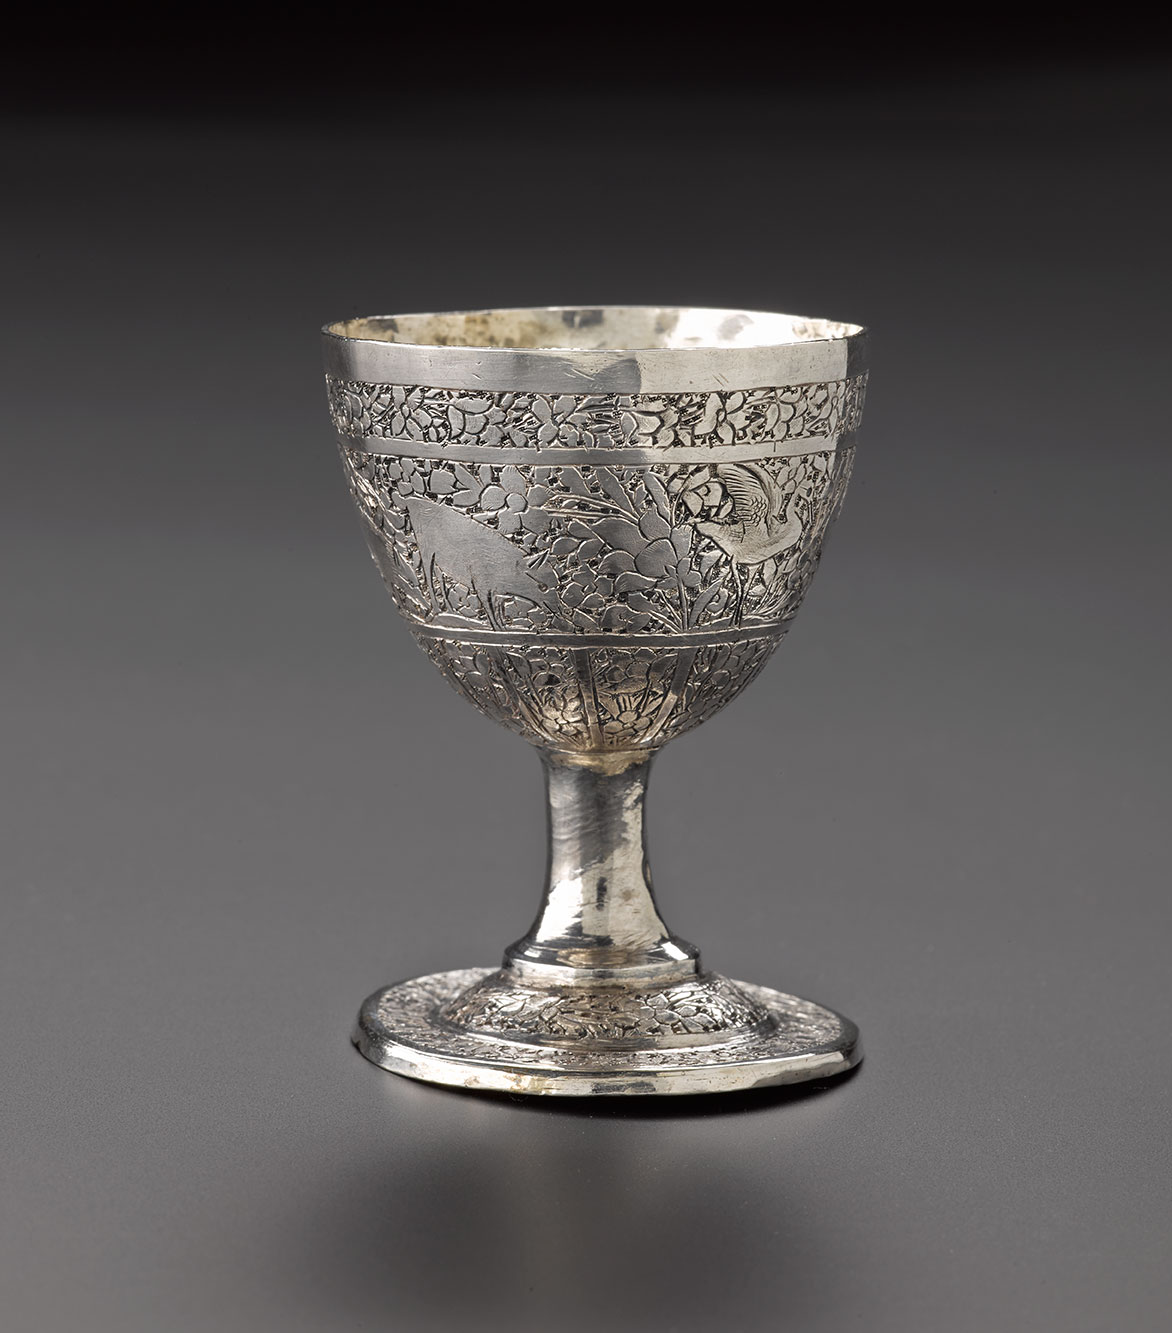 Egg cup of silver, with chased decoration of animals and floral motifs around the outside and base: Iran, probably Isfahan, 1920s-1940s, acc. no V.2015.66 